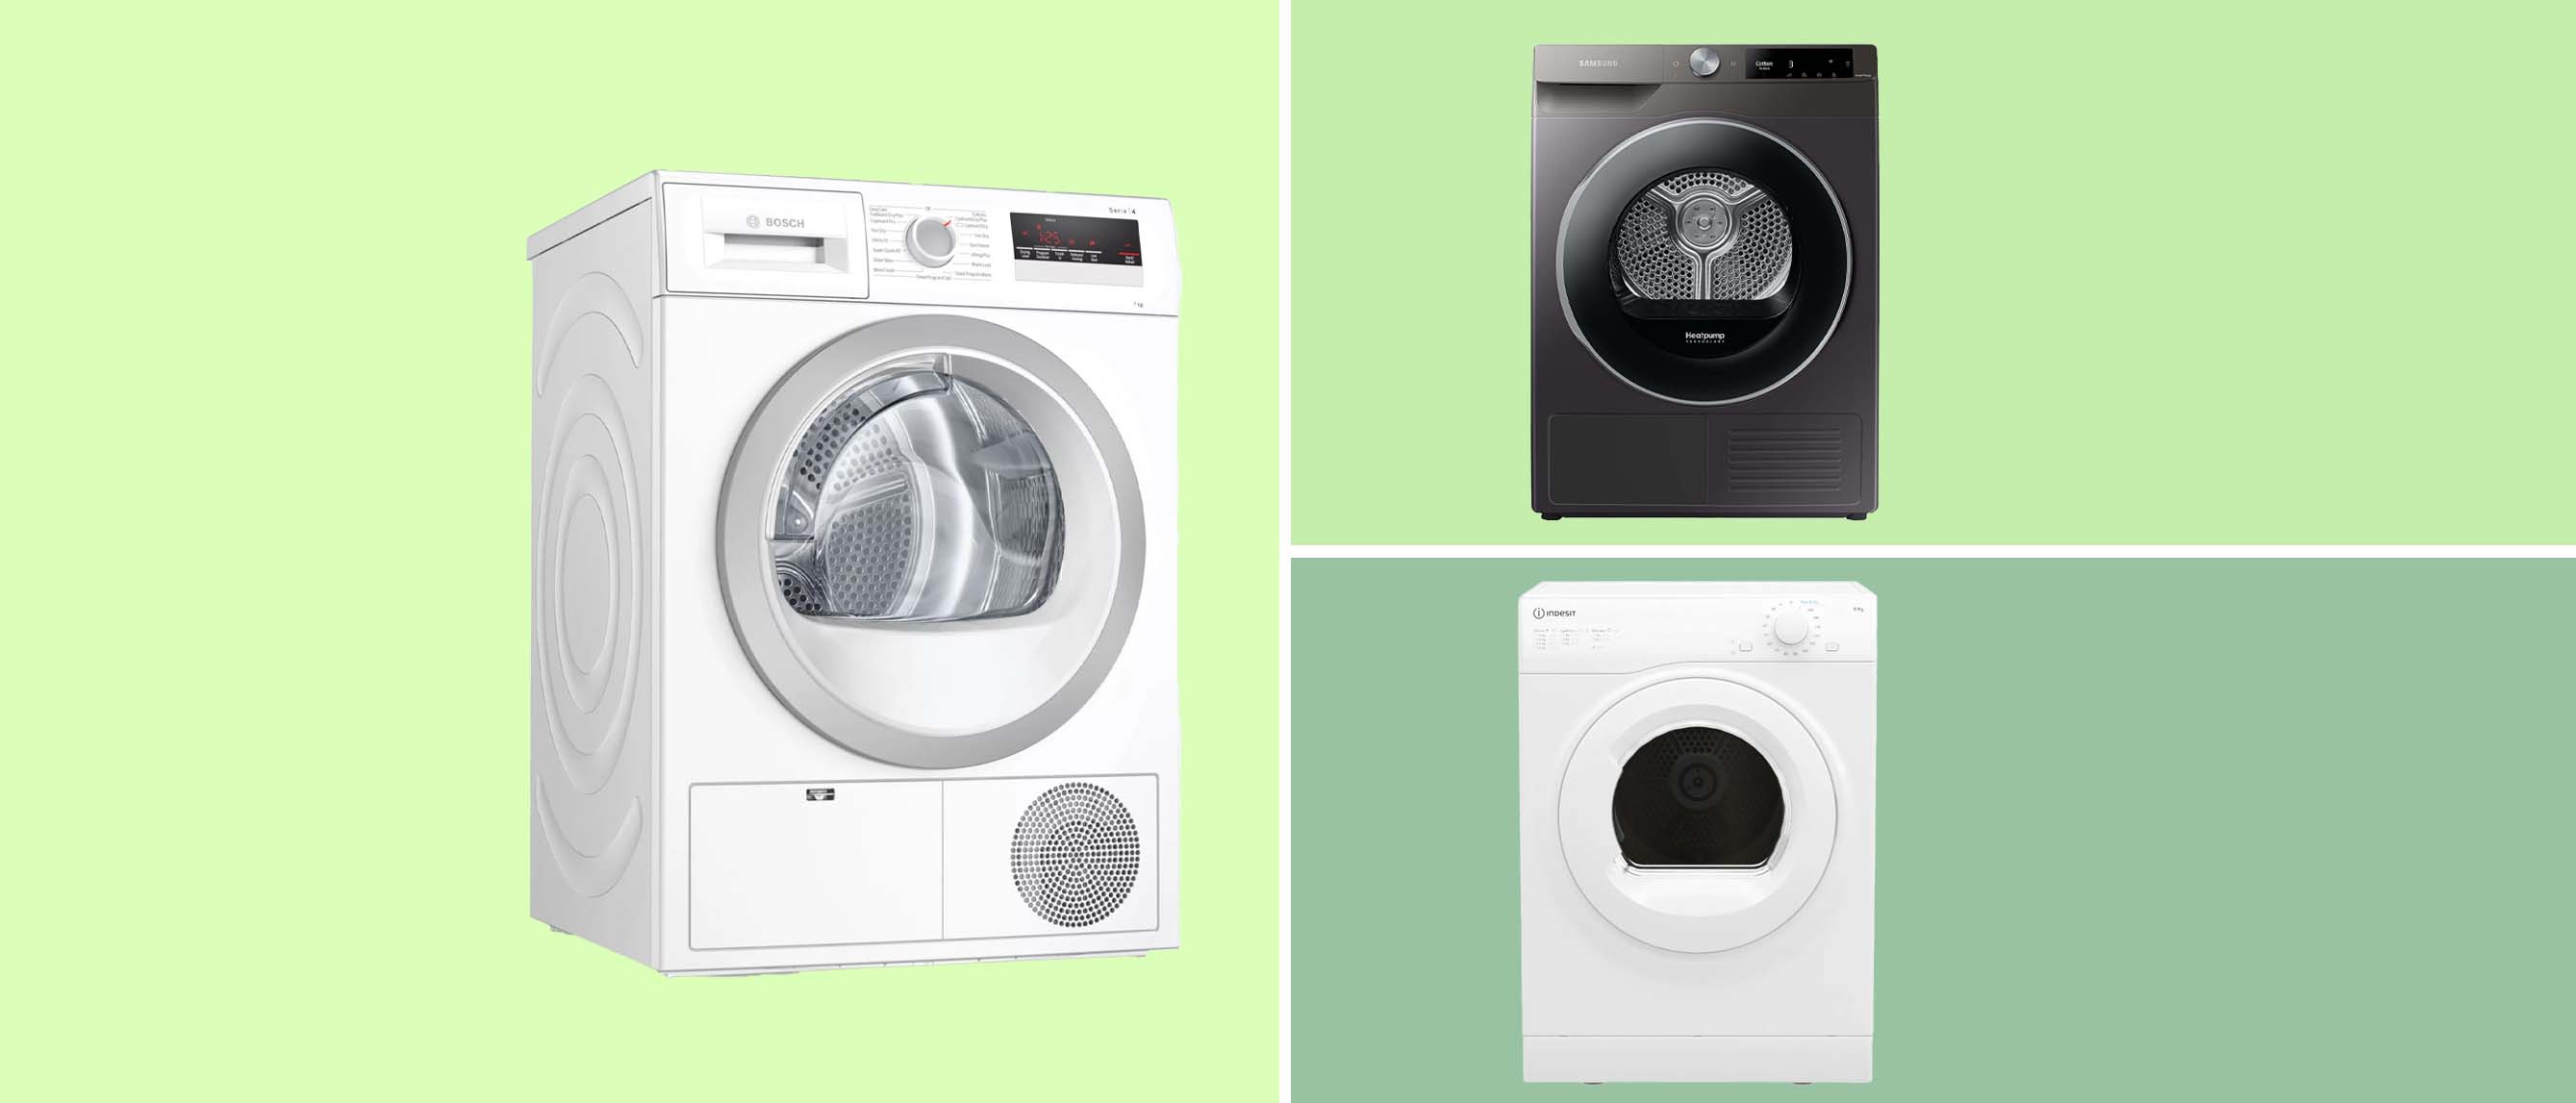 Heated clothes airer or tumble dryer: which is the better appliance?